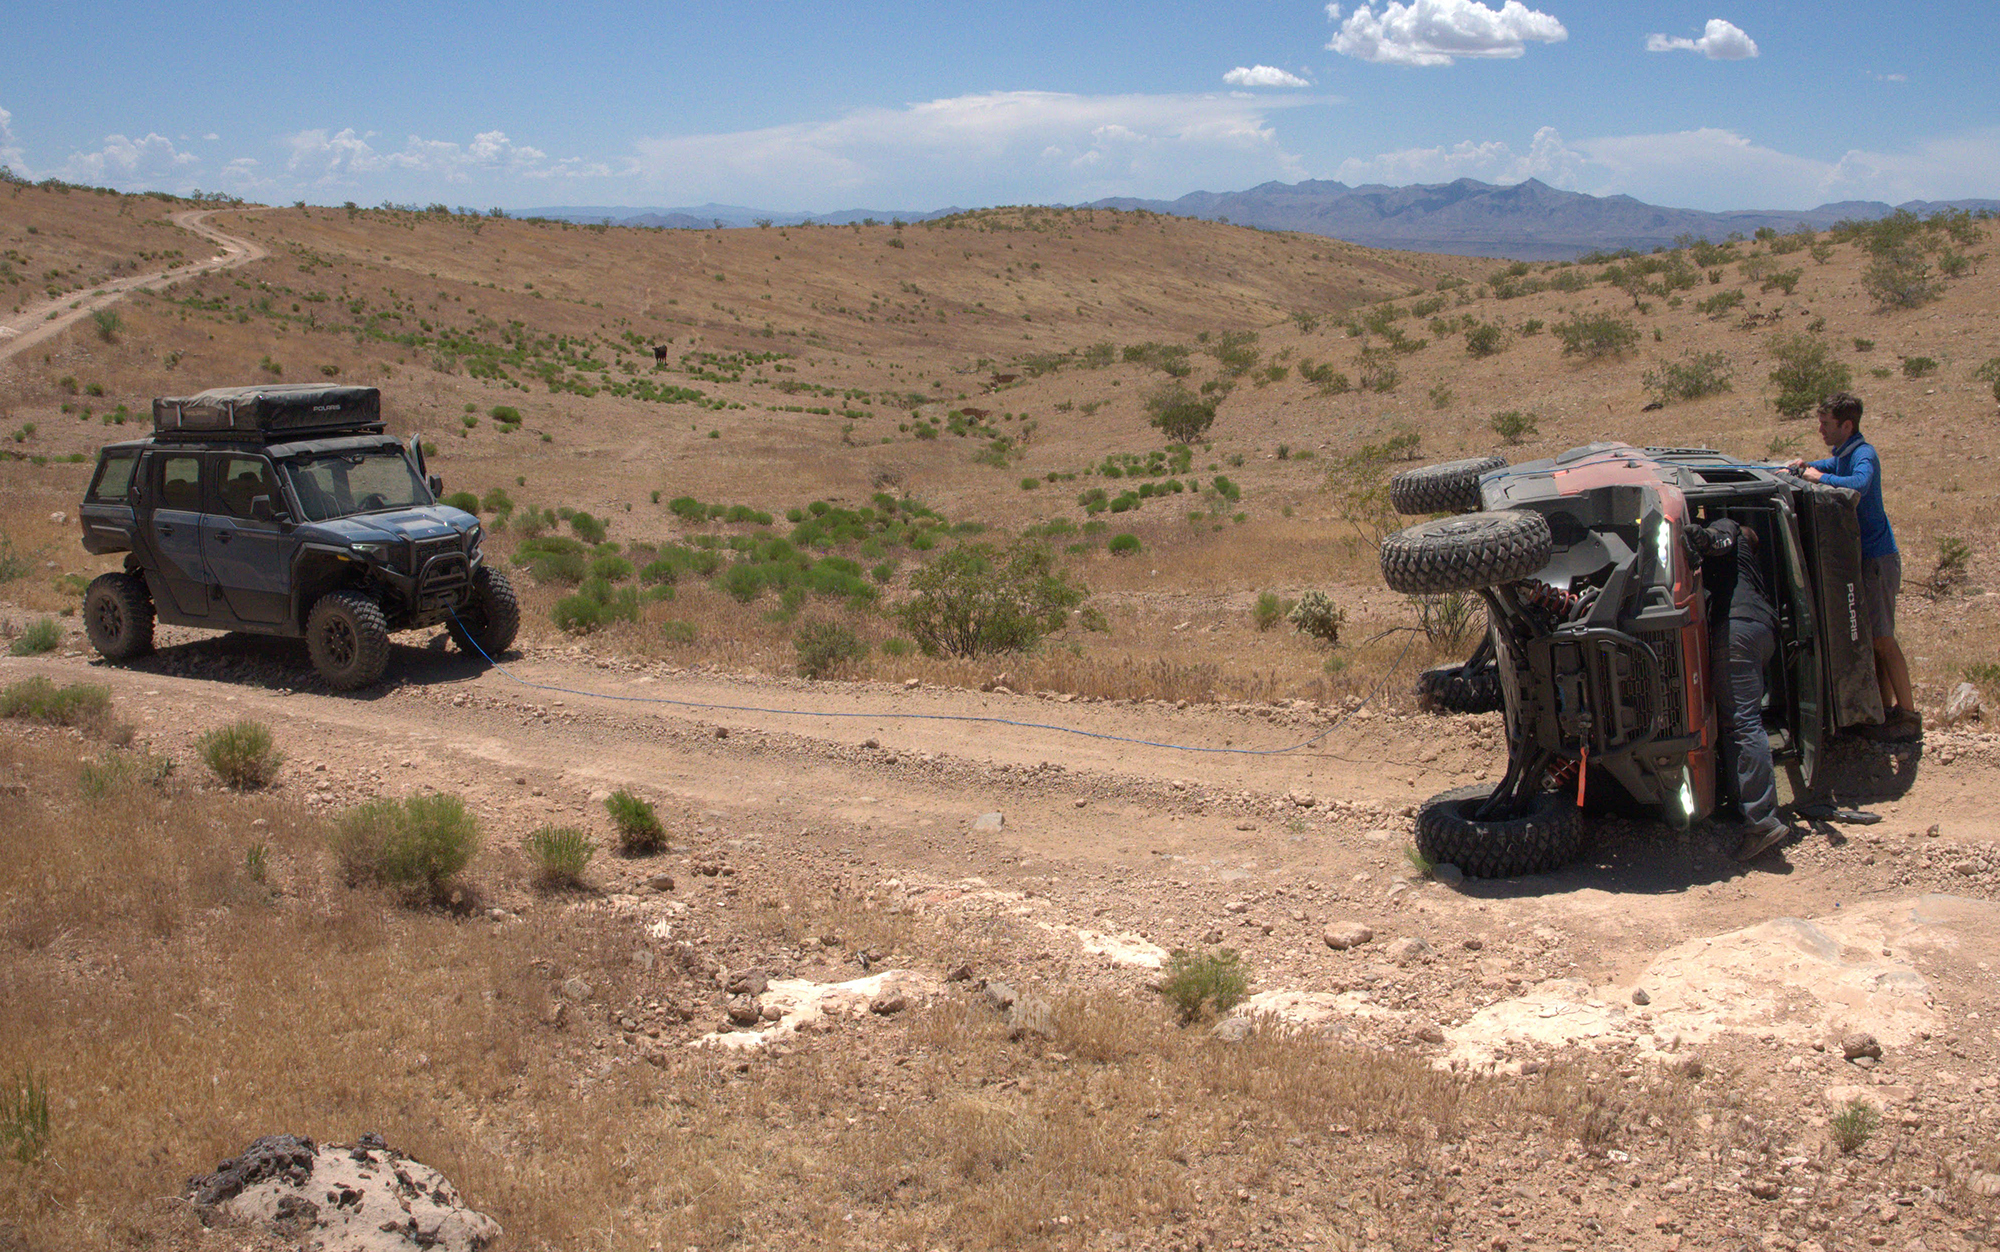 Polaris engineers used the 4,500-pound winch on another Xpedition ADV to right my rolled vehicle in seconds.